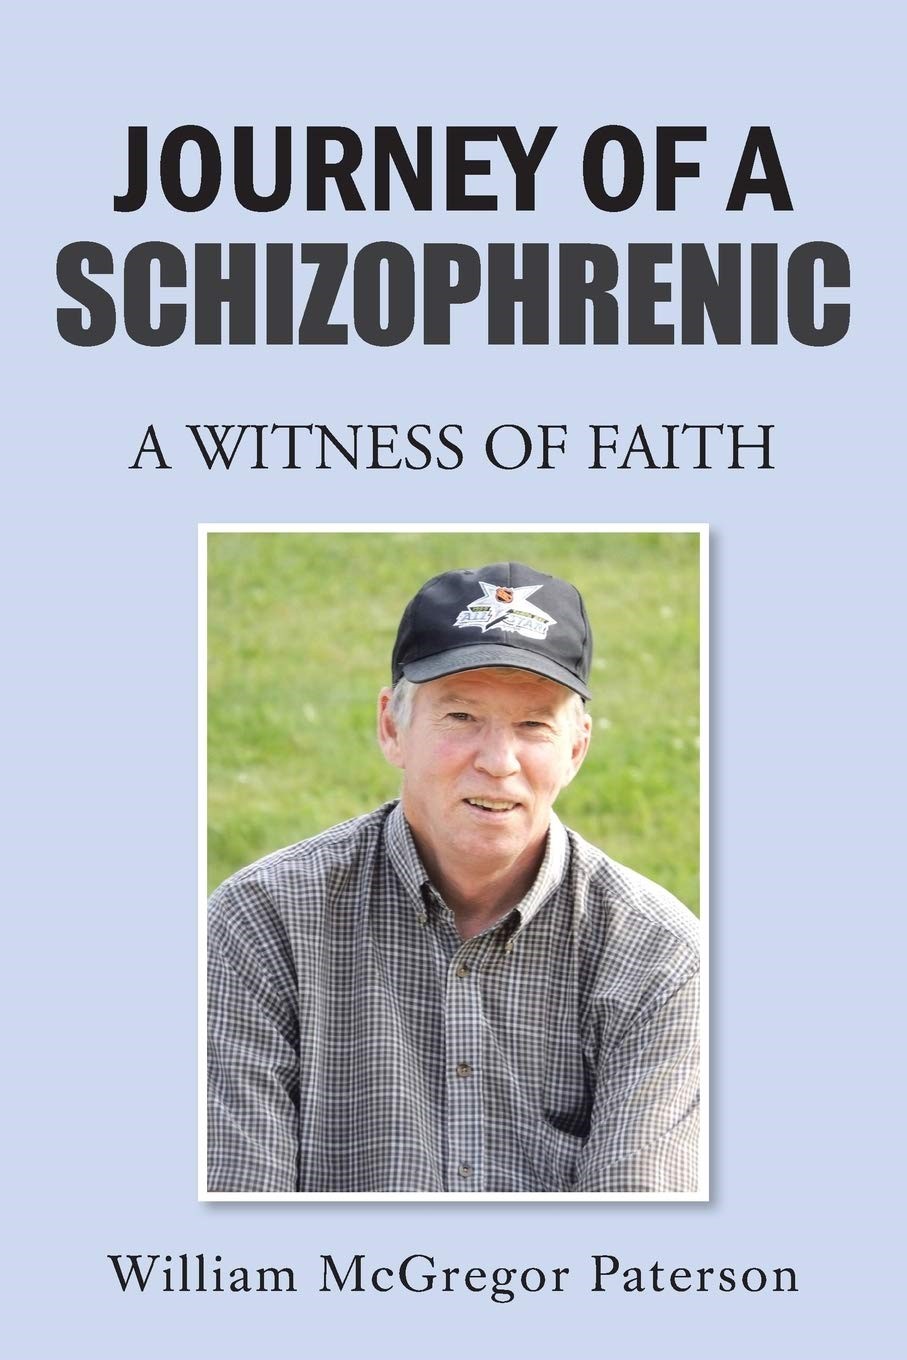 "Journey of a Schizophrenic: A Witness of Faith" - A New Book by William Paterson Shares His Personal Story of Overcoming Schizophrenia with Faith